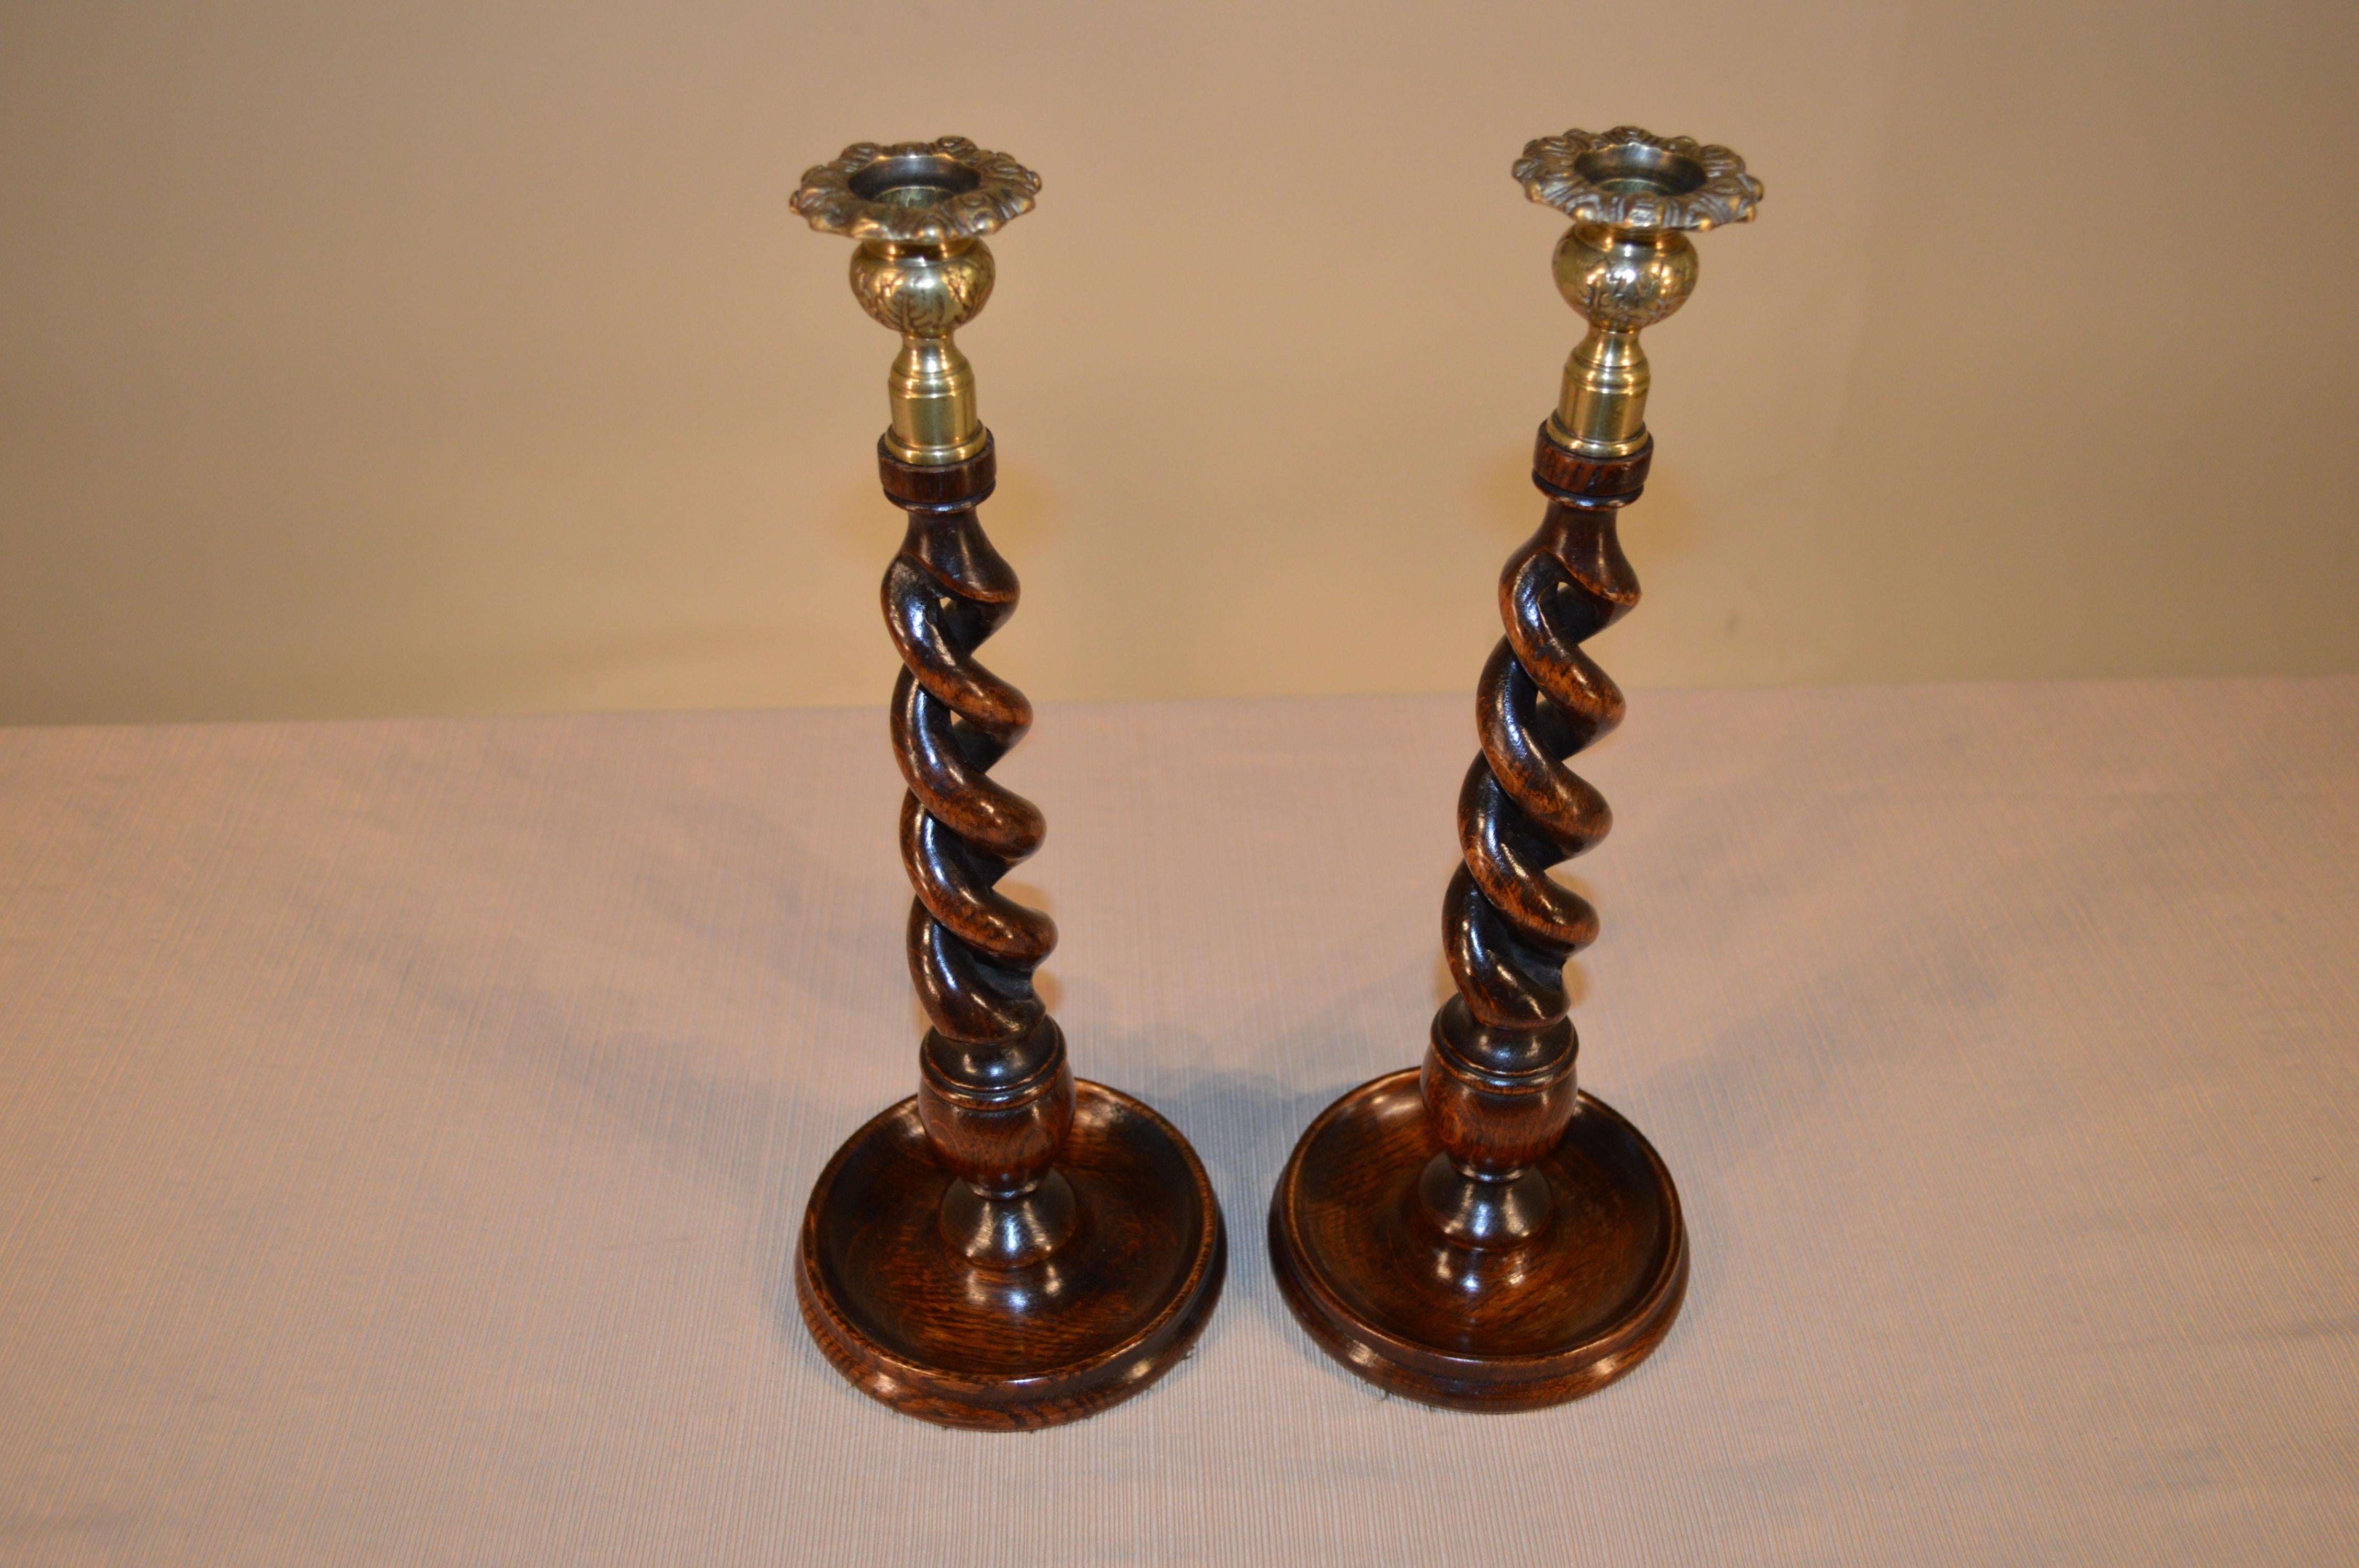 Late 19th century English oak candlesticks with hand-cast brass candle cups and hand-turned open barley twist stems, resting on hand-turned dish bases.